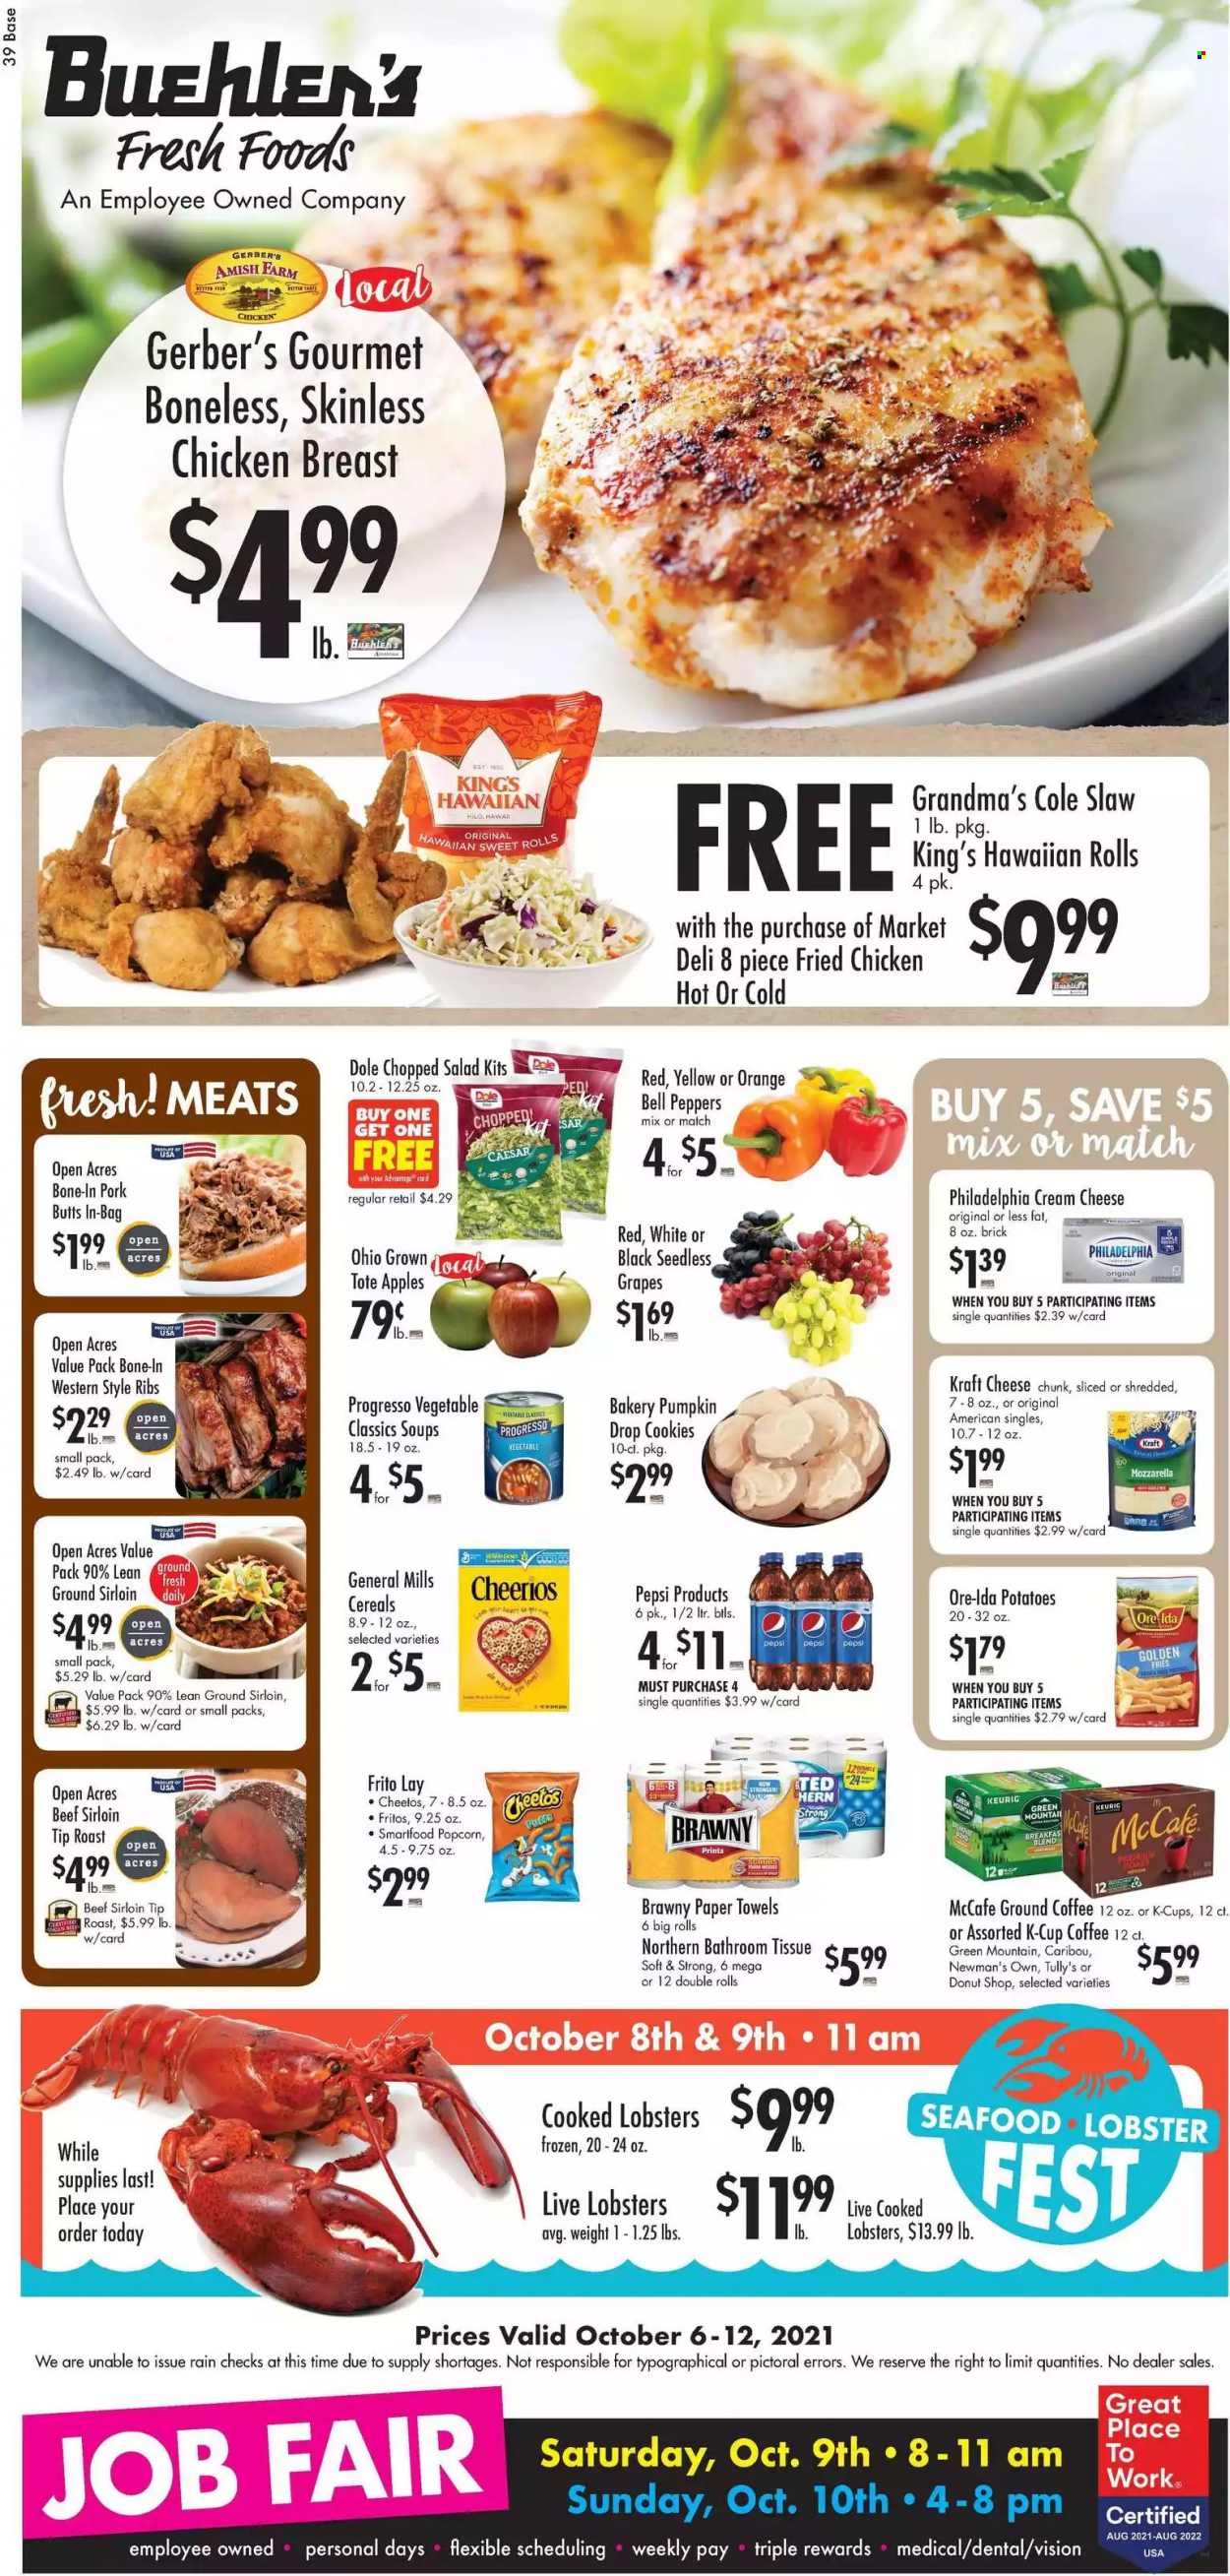 thumbnail - Buehler's Flyer - 10/06/2021 - 10/12/2021 - Sales products - seedless grapes, hawaiian rolls, sweet rolls, bell peppers, potatoes, pumpkin, salad, Dole, peppers, chopped salad, apples, grapes, oranges, lobster, seafood, fried chicken, Progresso, Kraft®, cream cheese, mozzarella, Philadelphia, cheese, potato fries, Ore-Ida, cookies, Fritos, Gerber, Cheetos, Smartfood, popcorn, cereals, Cheerios, Pepsi, coffee, ground coffee, coffee capsules, McCafe, K-Cups, Keurig, Green Mountain, chicken breasts, beef meat, beef sirloin, bath tissue, kitchen towels, paper towels, tote. Page 1.